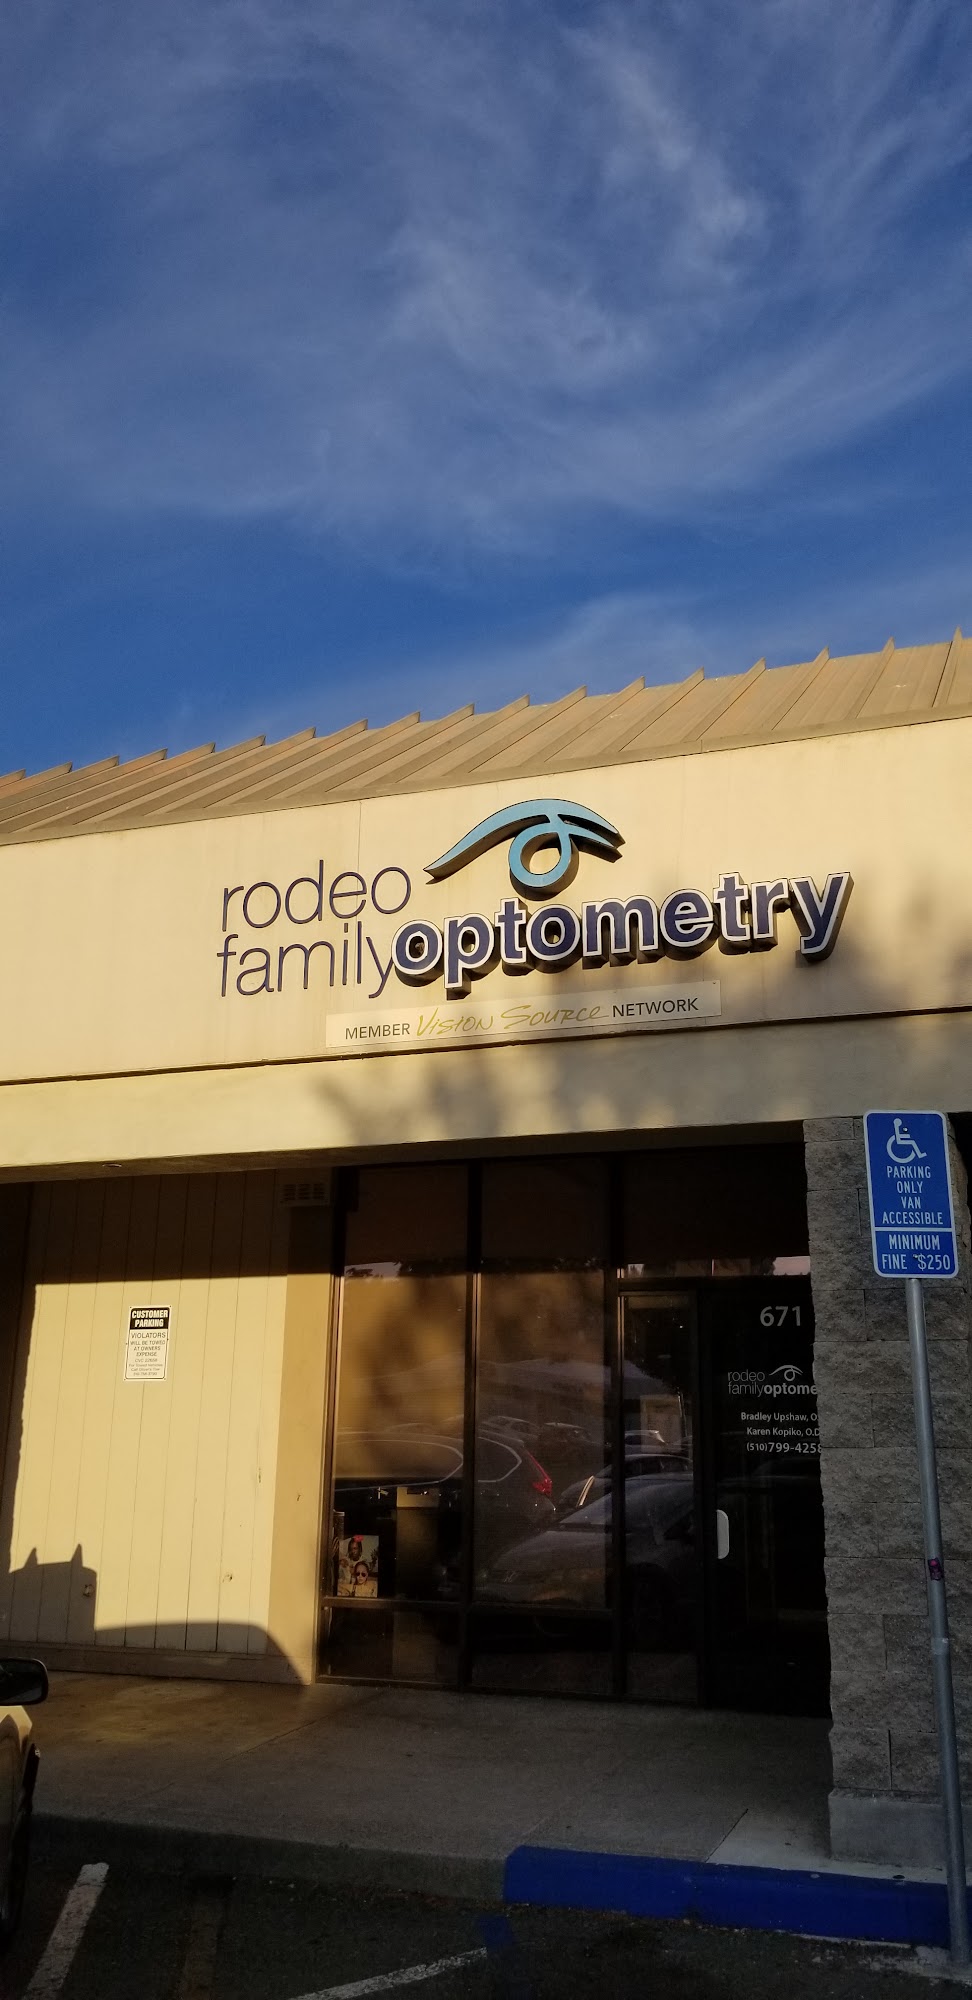 Rodeo Family Optometry 671 Parker Ave, Rodeo California 94572